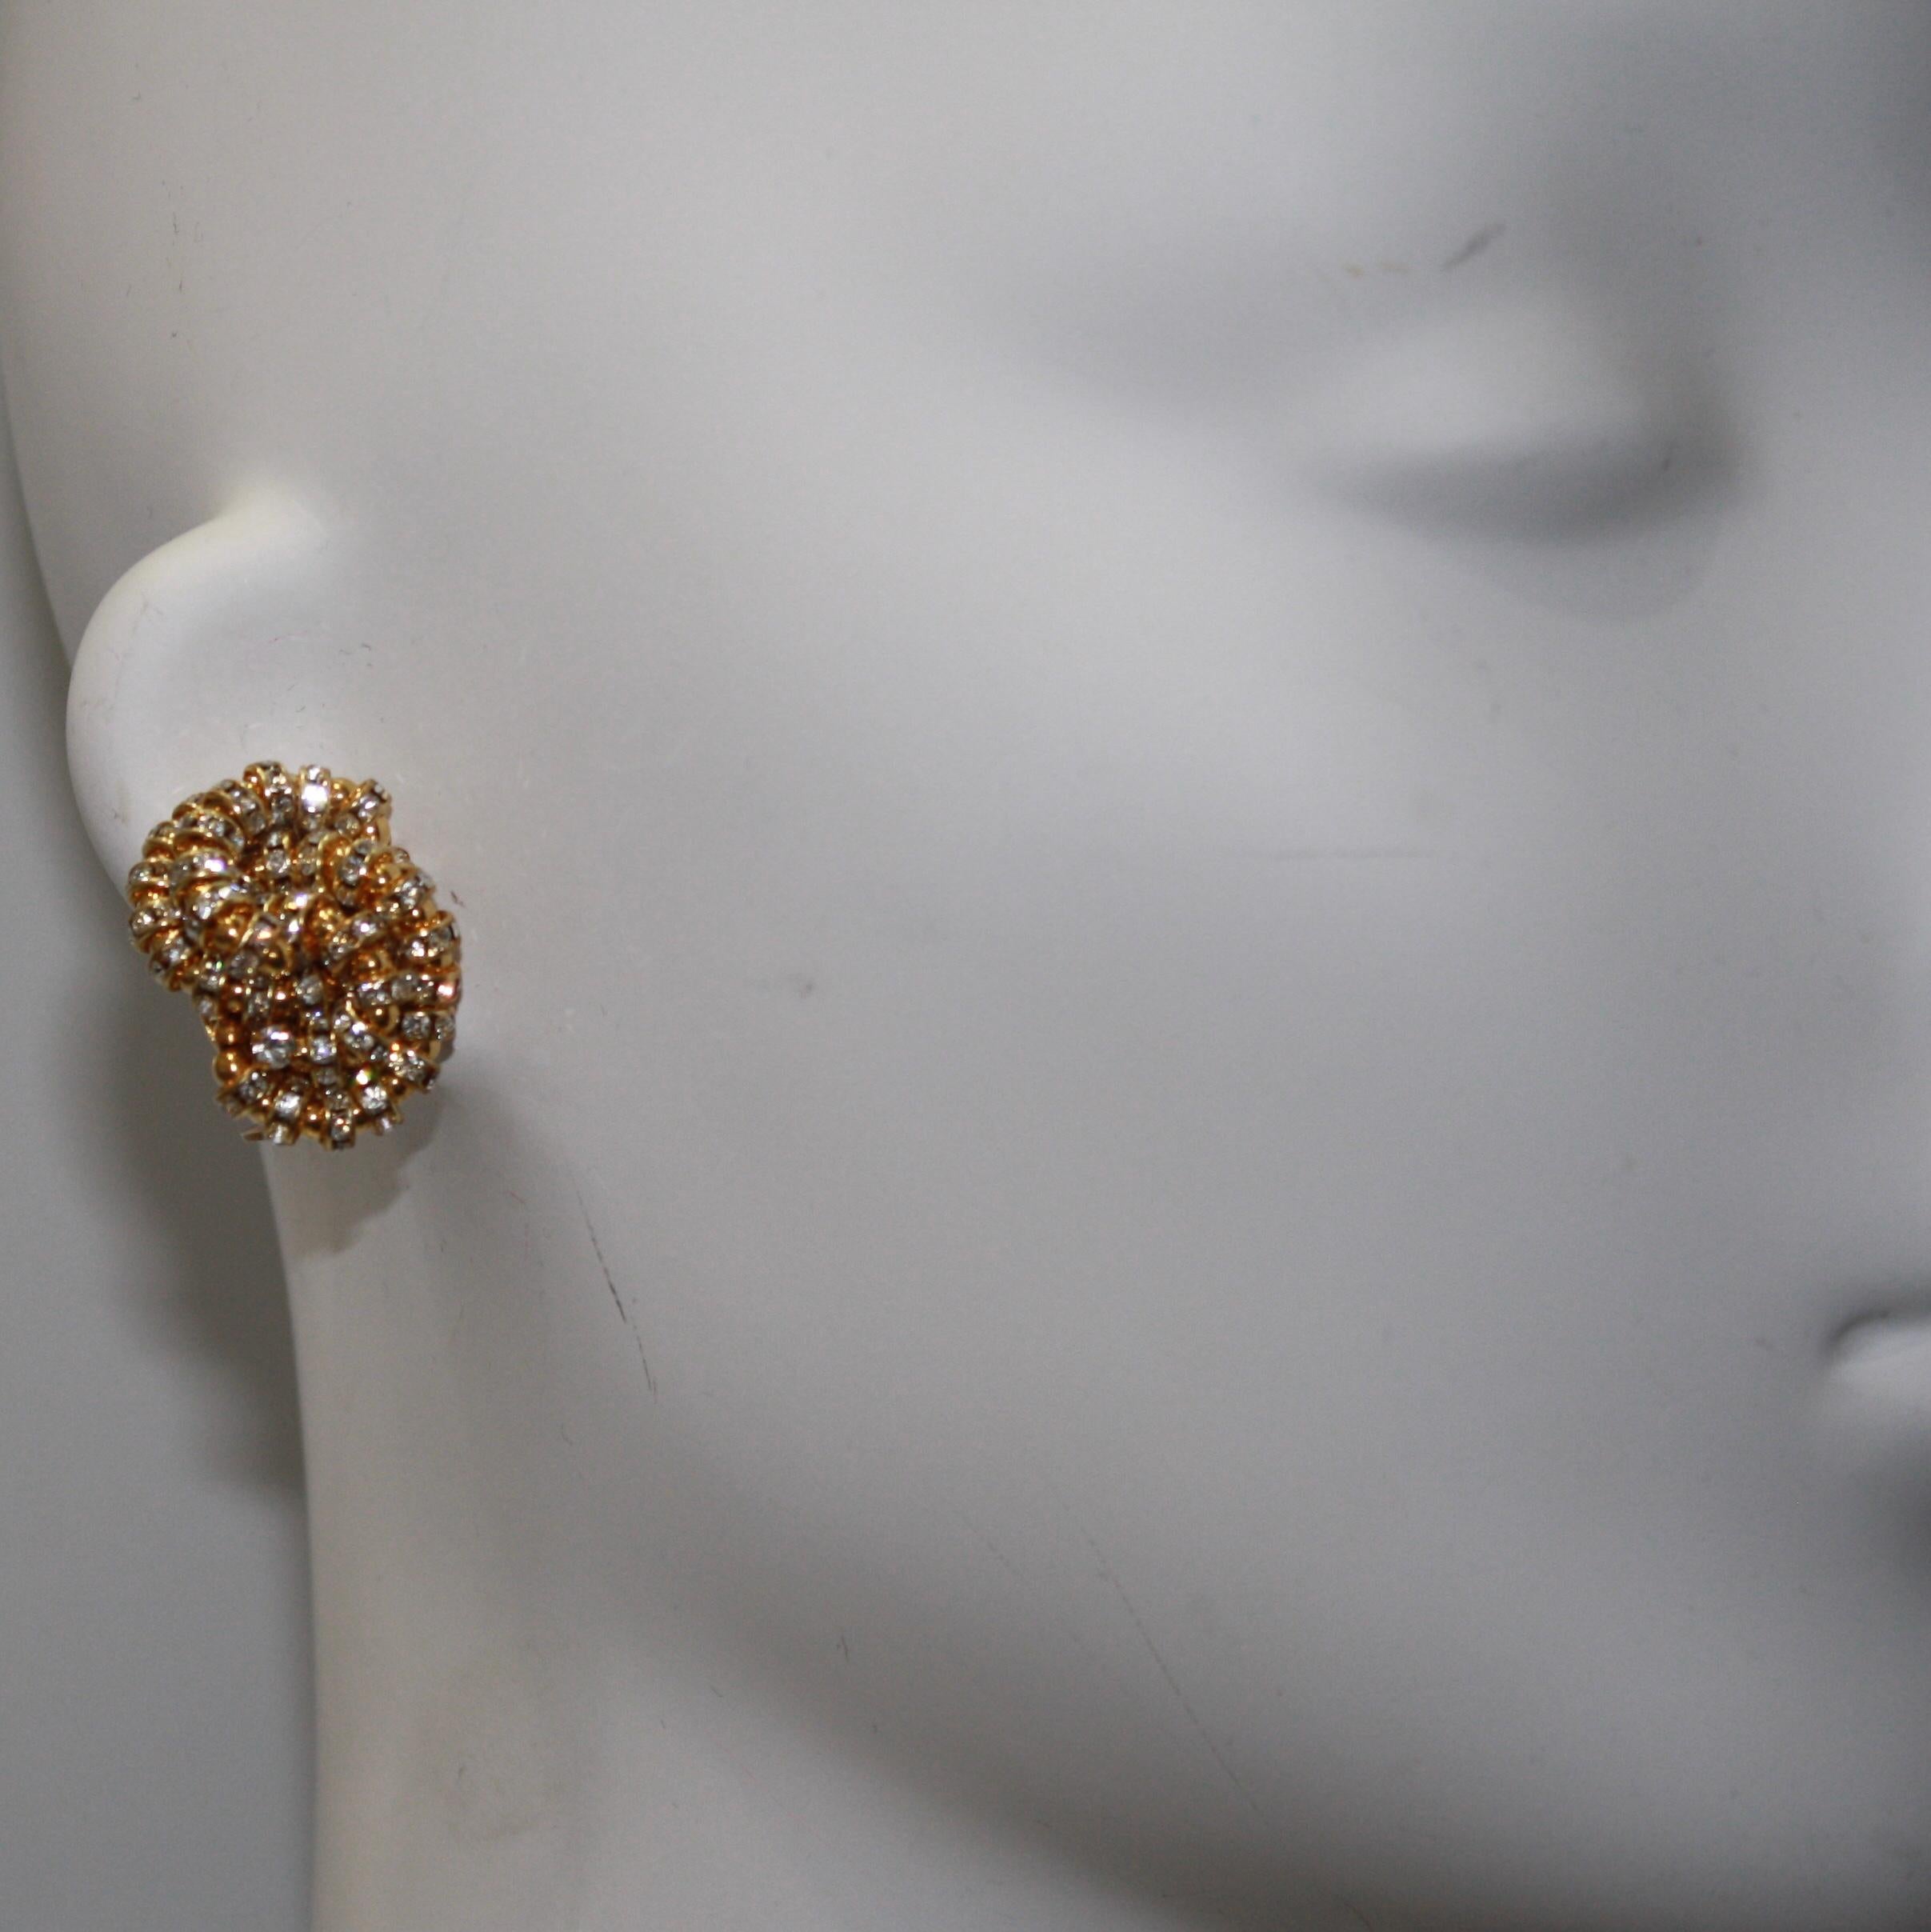 Swirls of Swarovski crystal rondelles set on gold metal.
A classic design by Francoise Montague . Fits perfectly on the ear.
Francoise Montague took over the De Saurma jewelry workshop in the late 1940s. Her mother founded the workshop in 1945,